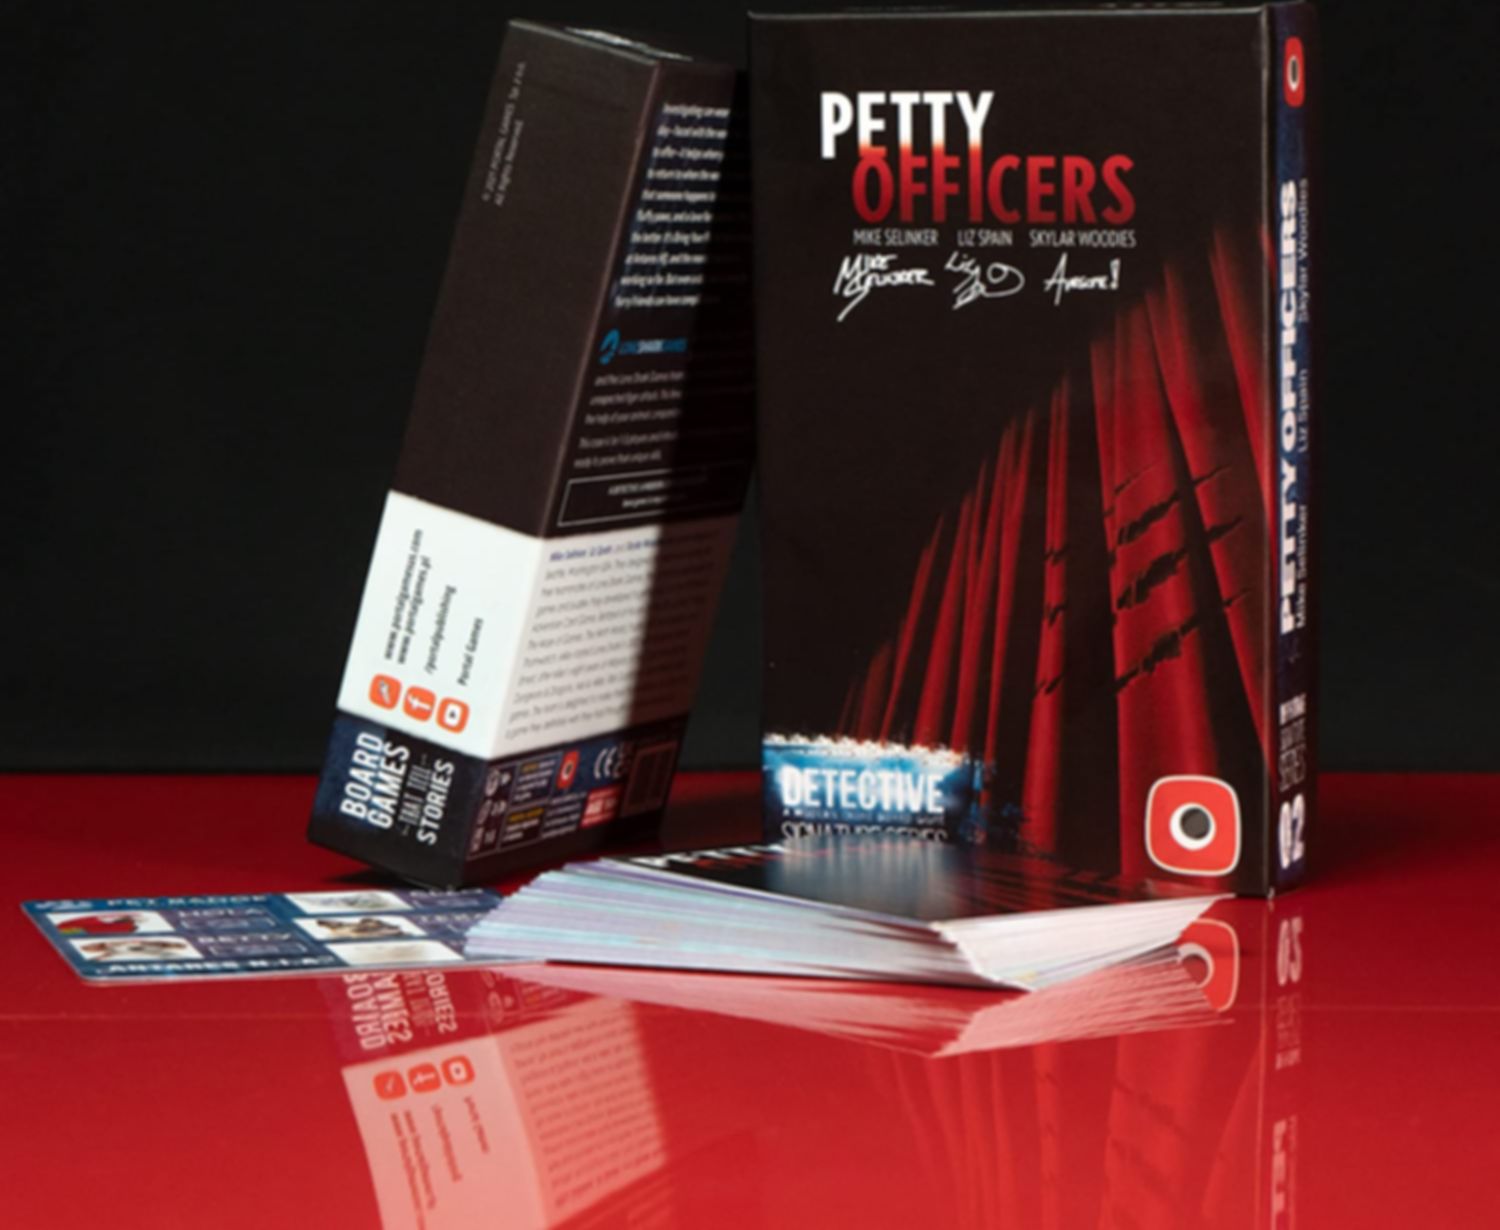 Detective: Signature Series – Petty Officers components